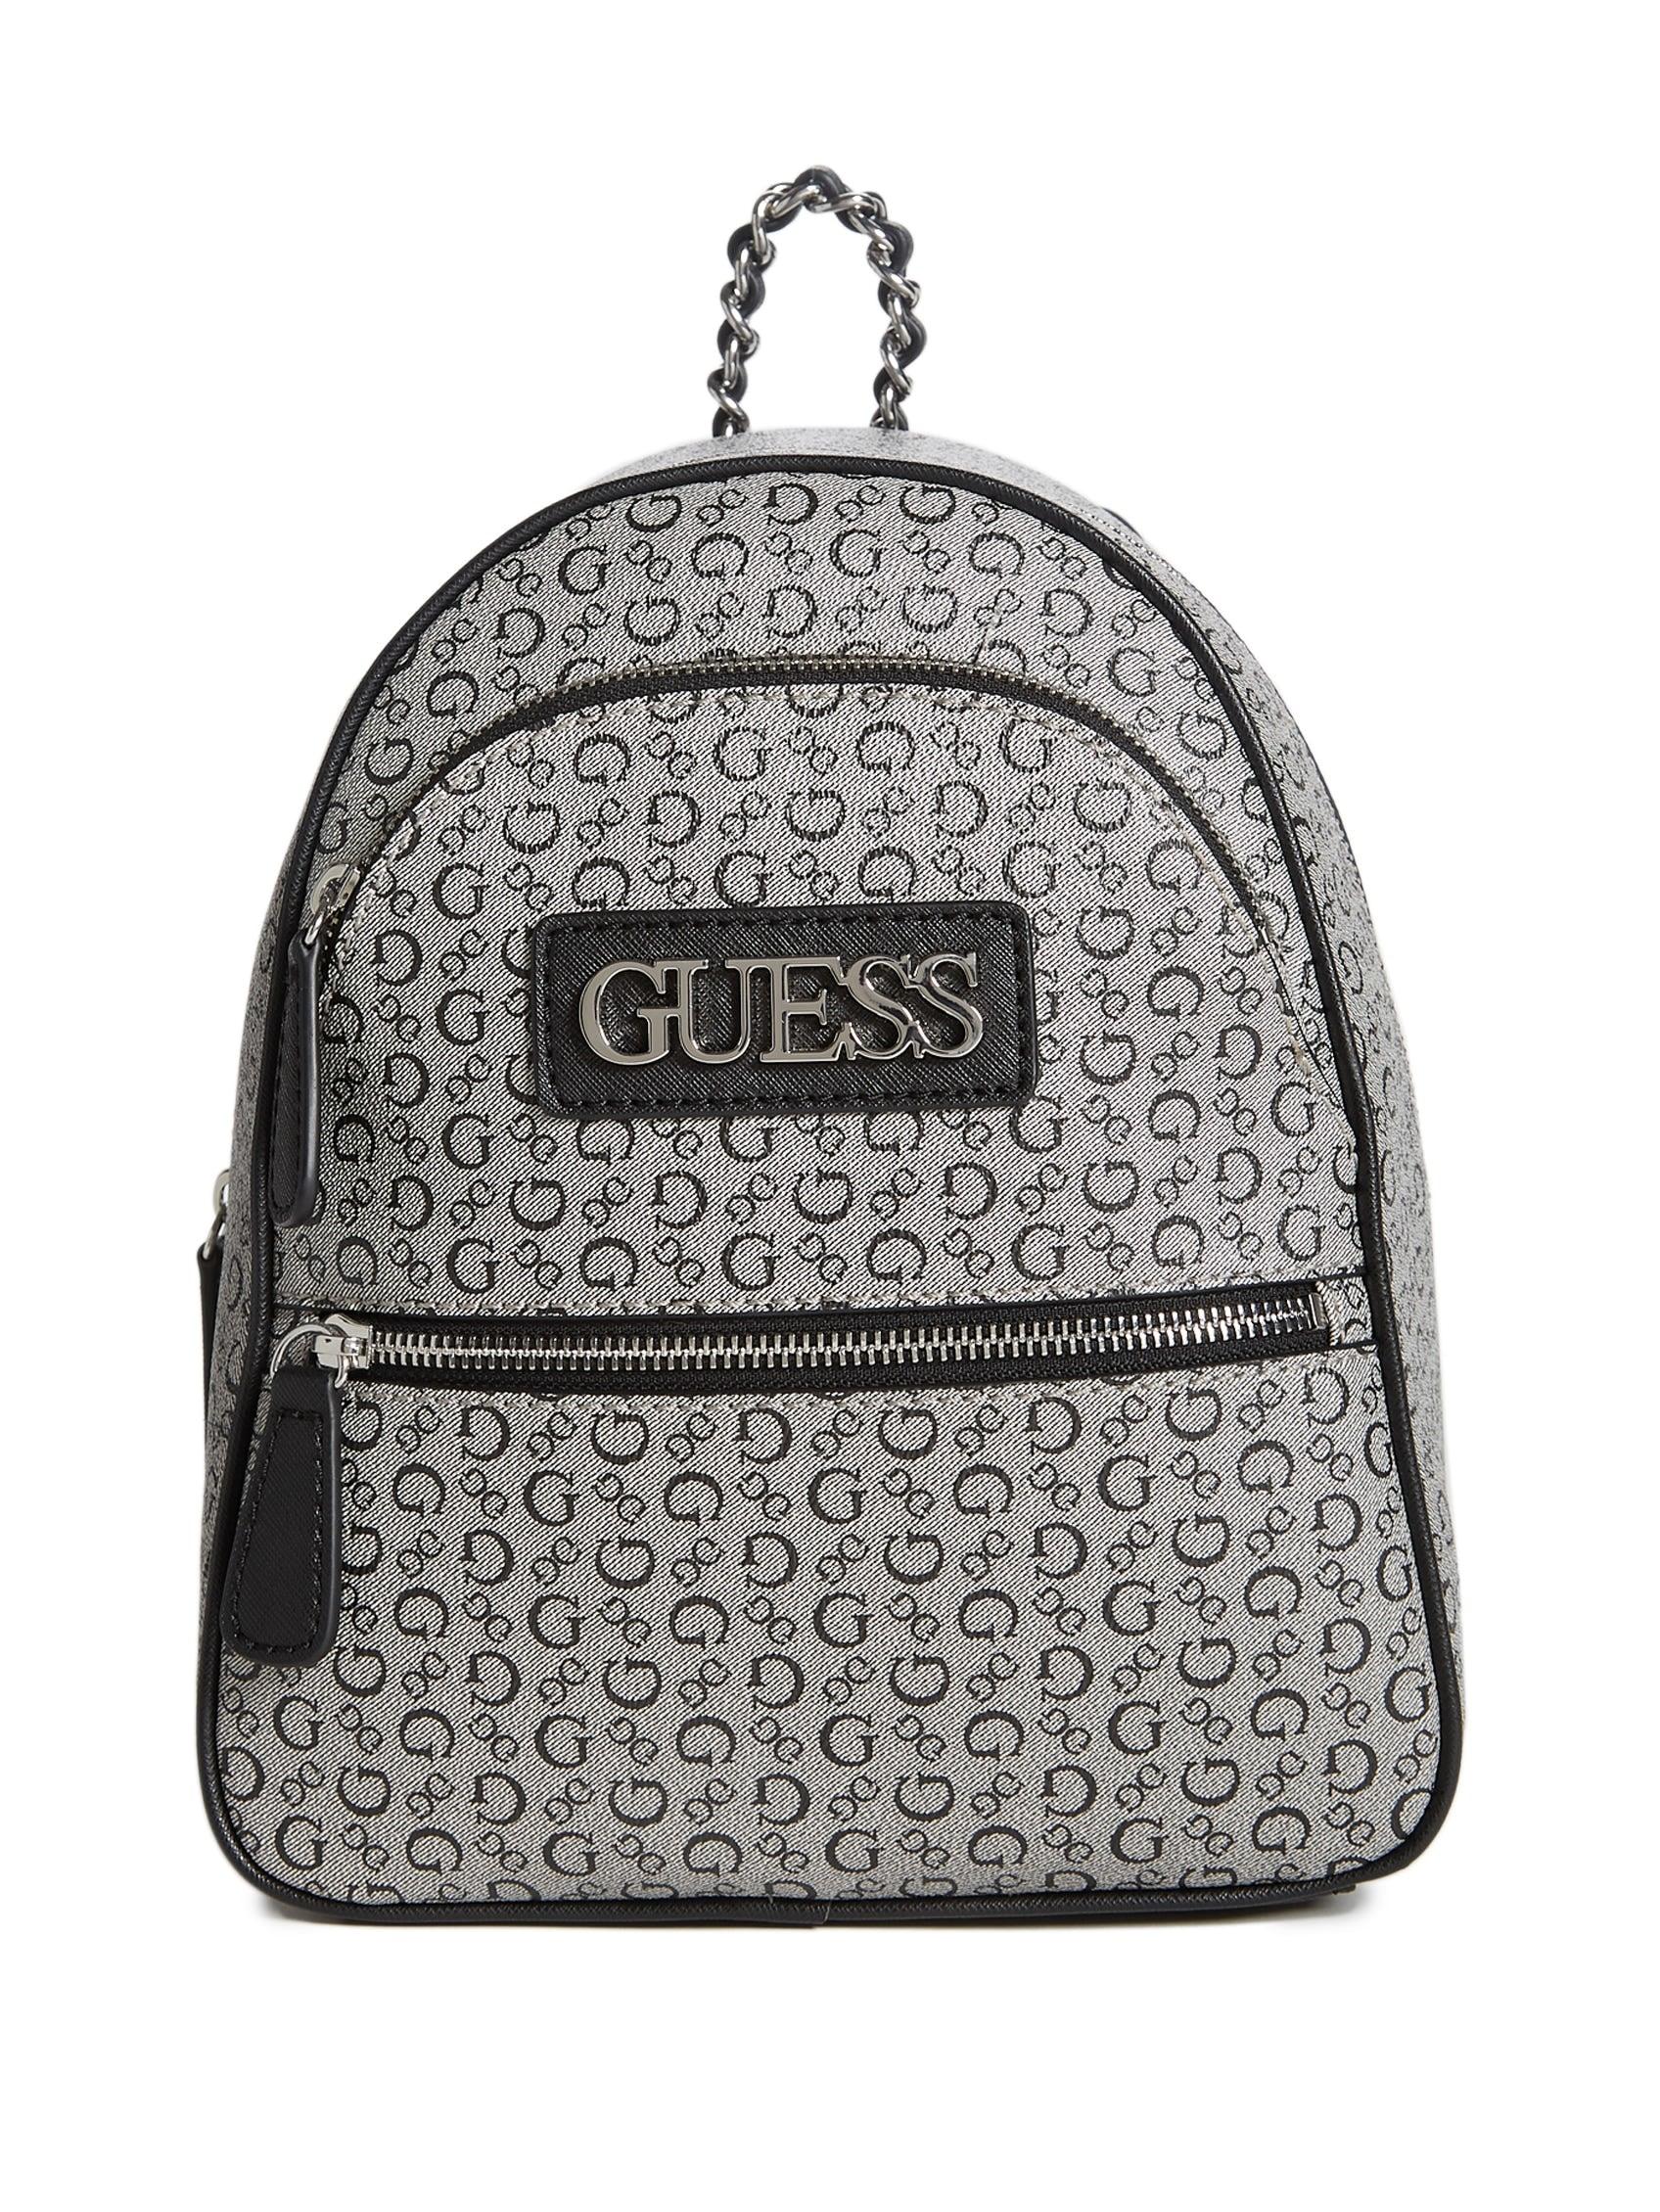 Guess | Bags | Guess Los Angeles Mini Backpack | Poshmark